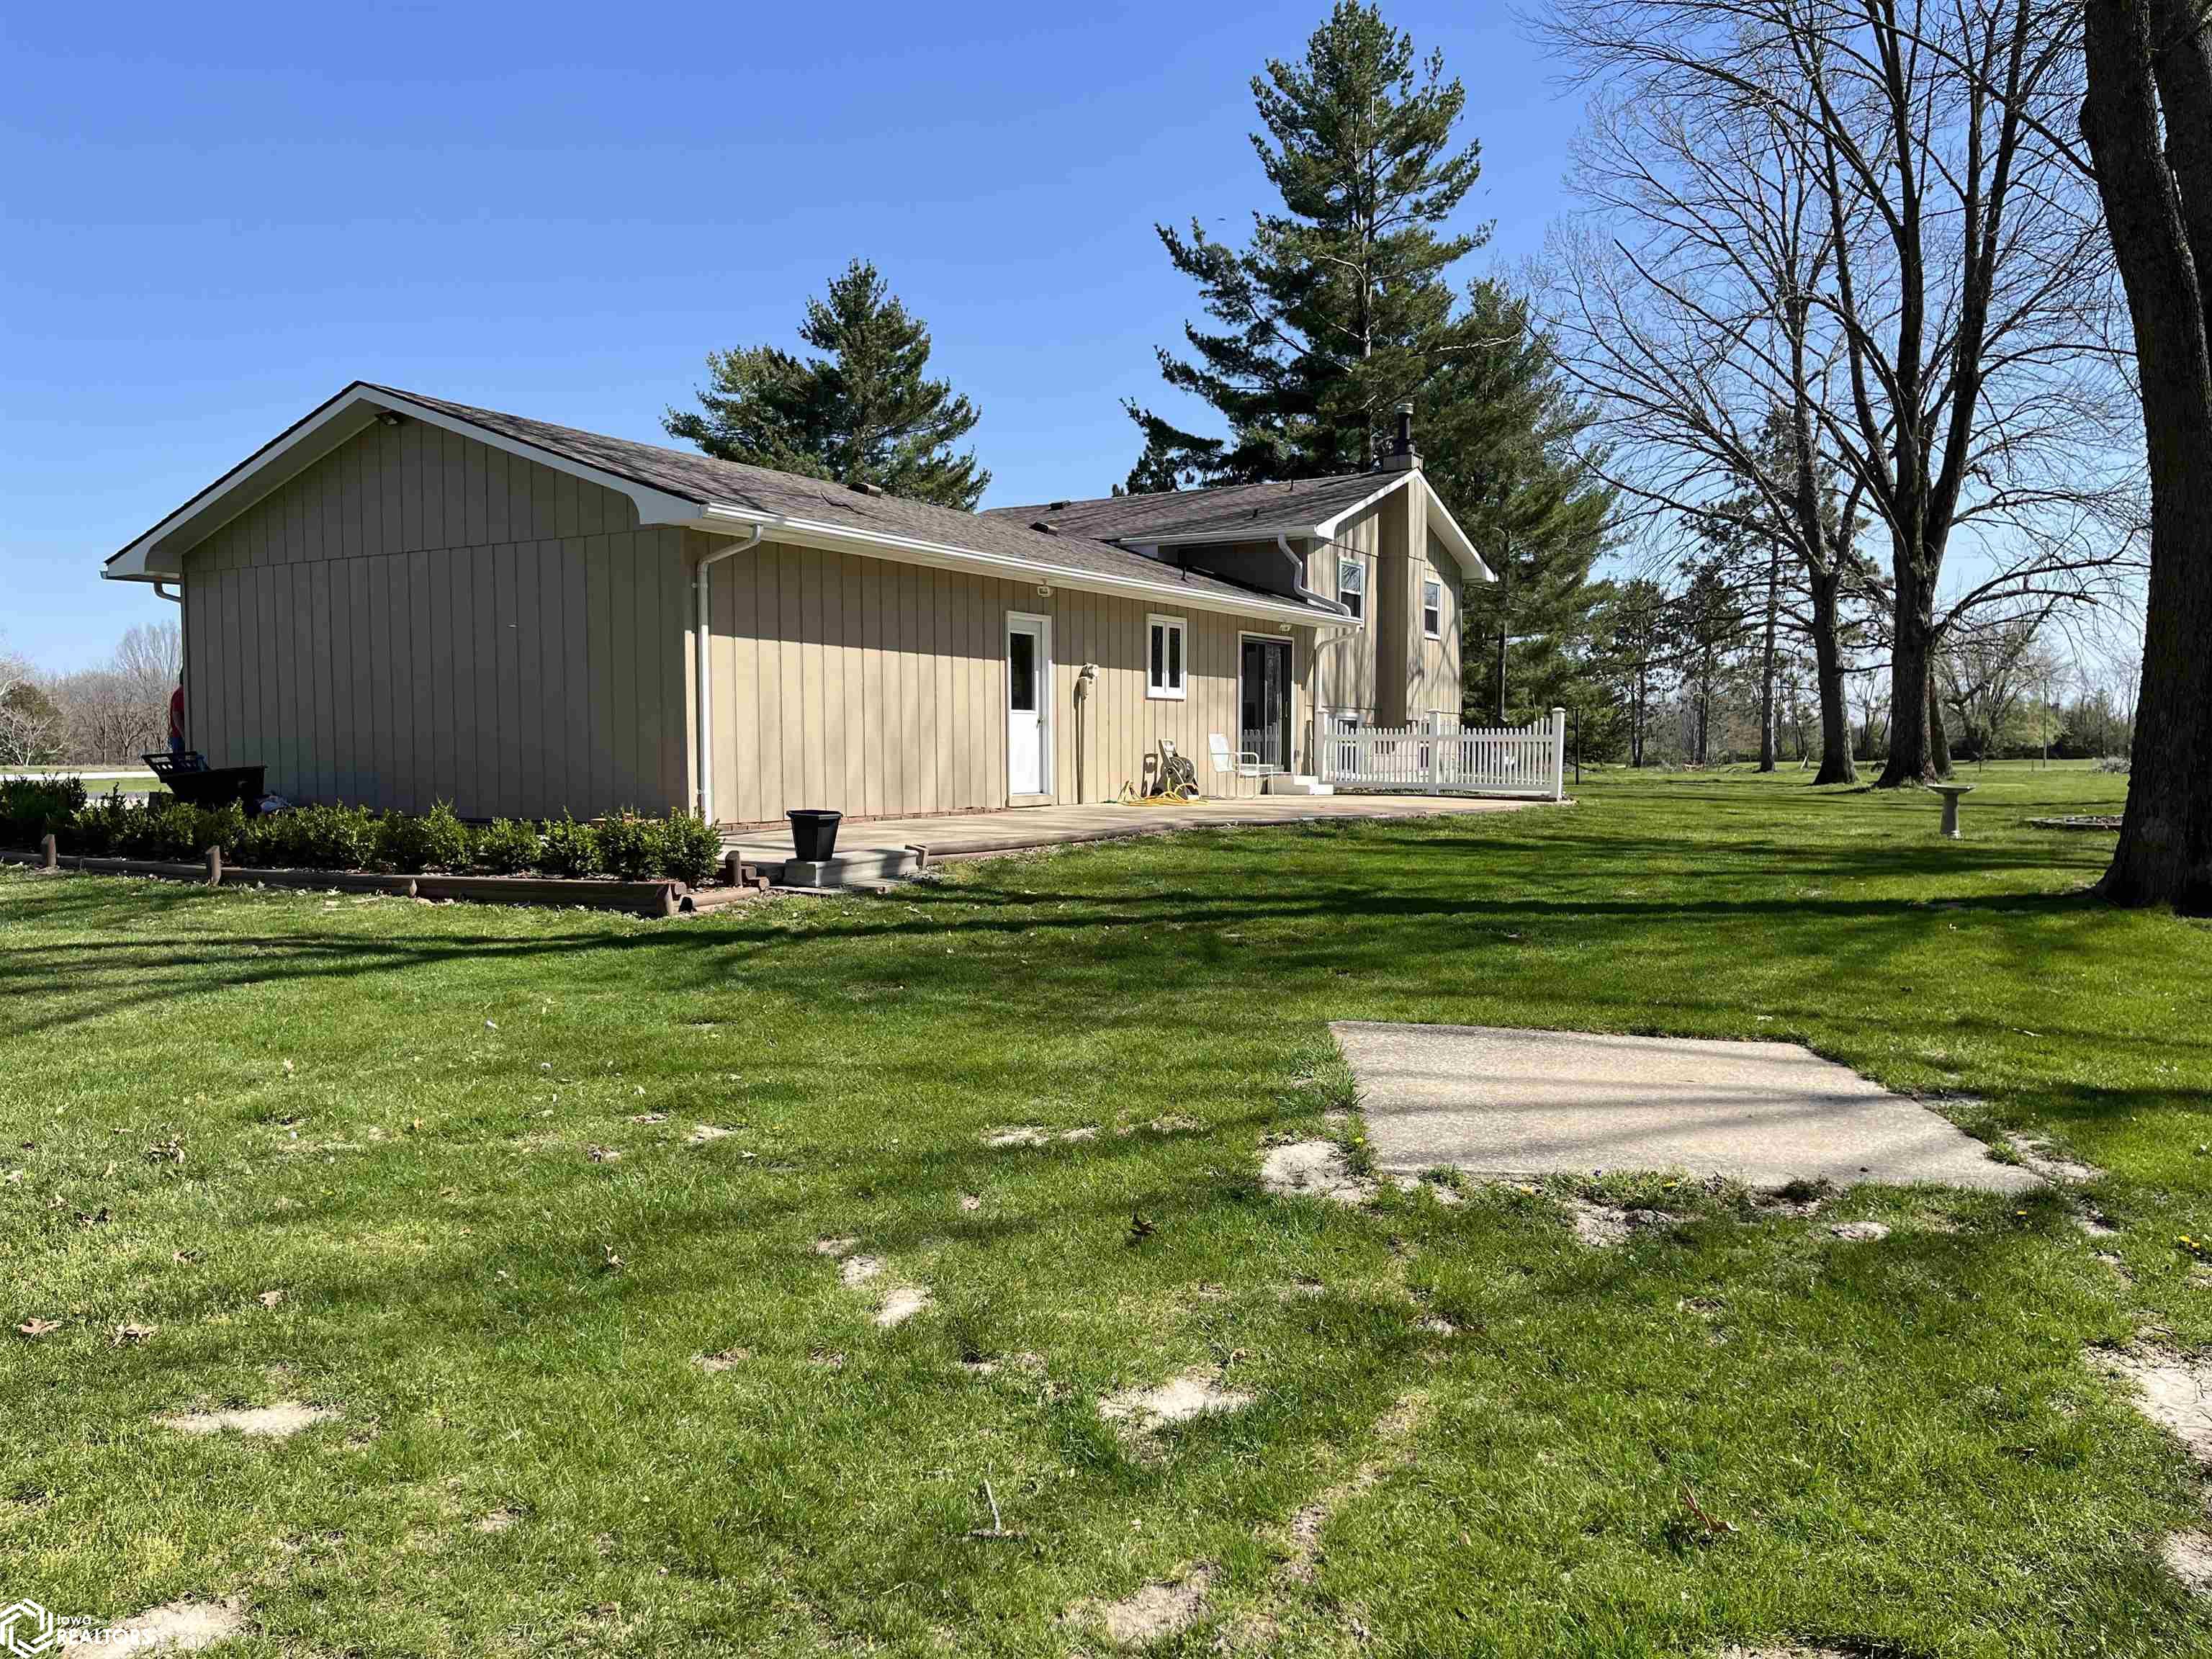 1470 N COUNTY RD 800, Hamilton, Illinois 62341, 3 Bedrooms Bedrooms, ,2 BathroomsBathrooms,Single Family,For Sale,N COUNTY RD 800,6316446